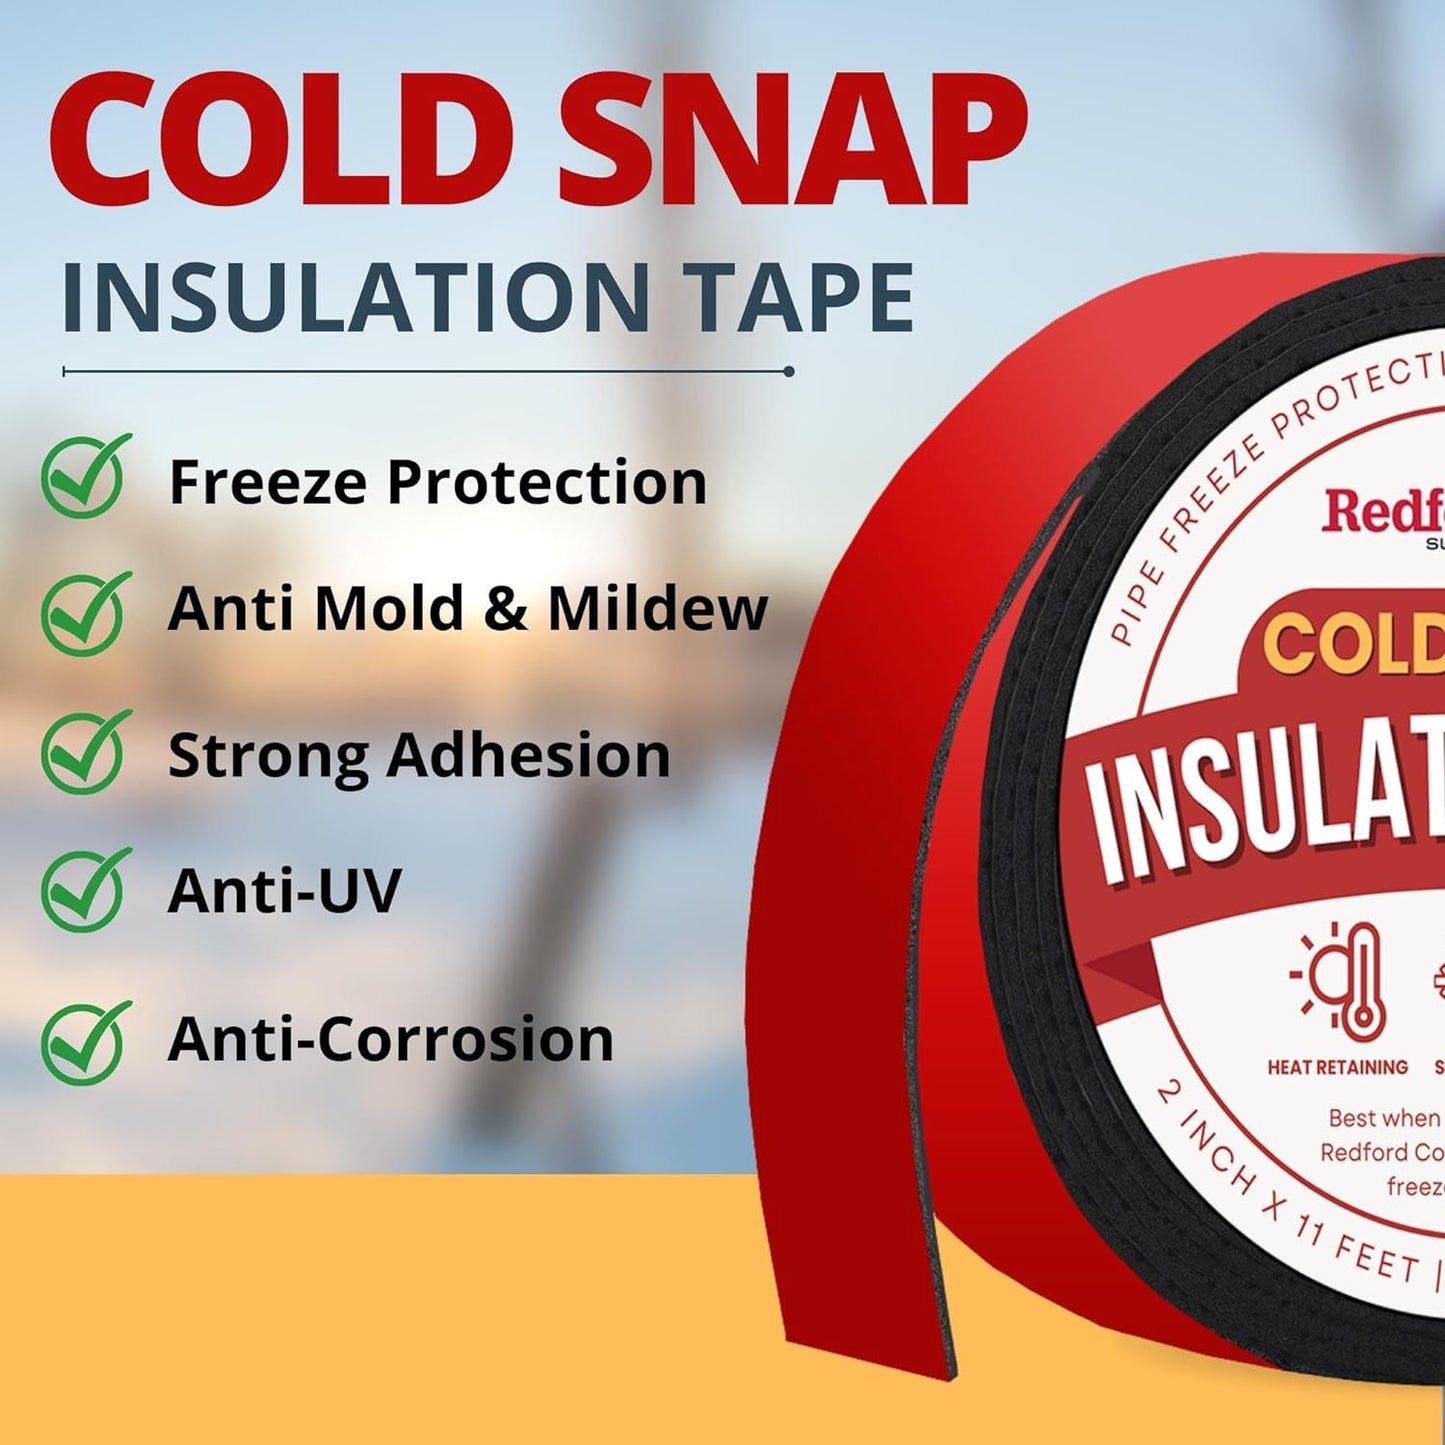 Redford Supply Co. 2 Inch Pipe Insulation Tape - Weather Resistant Water Pipe Wrap Tape - Outdoor Water Pipe Insulation Wrap, Insulation Tape for Water Pipes, Pipe Wrap Insulation, Foam Pipe Insulation (2 inch x 11 Feet, Red)